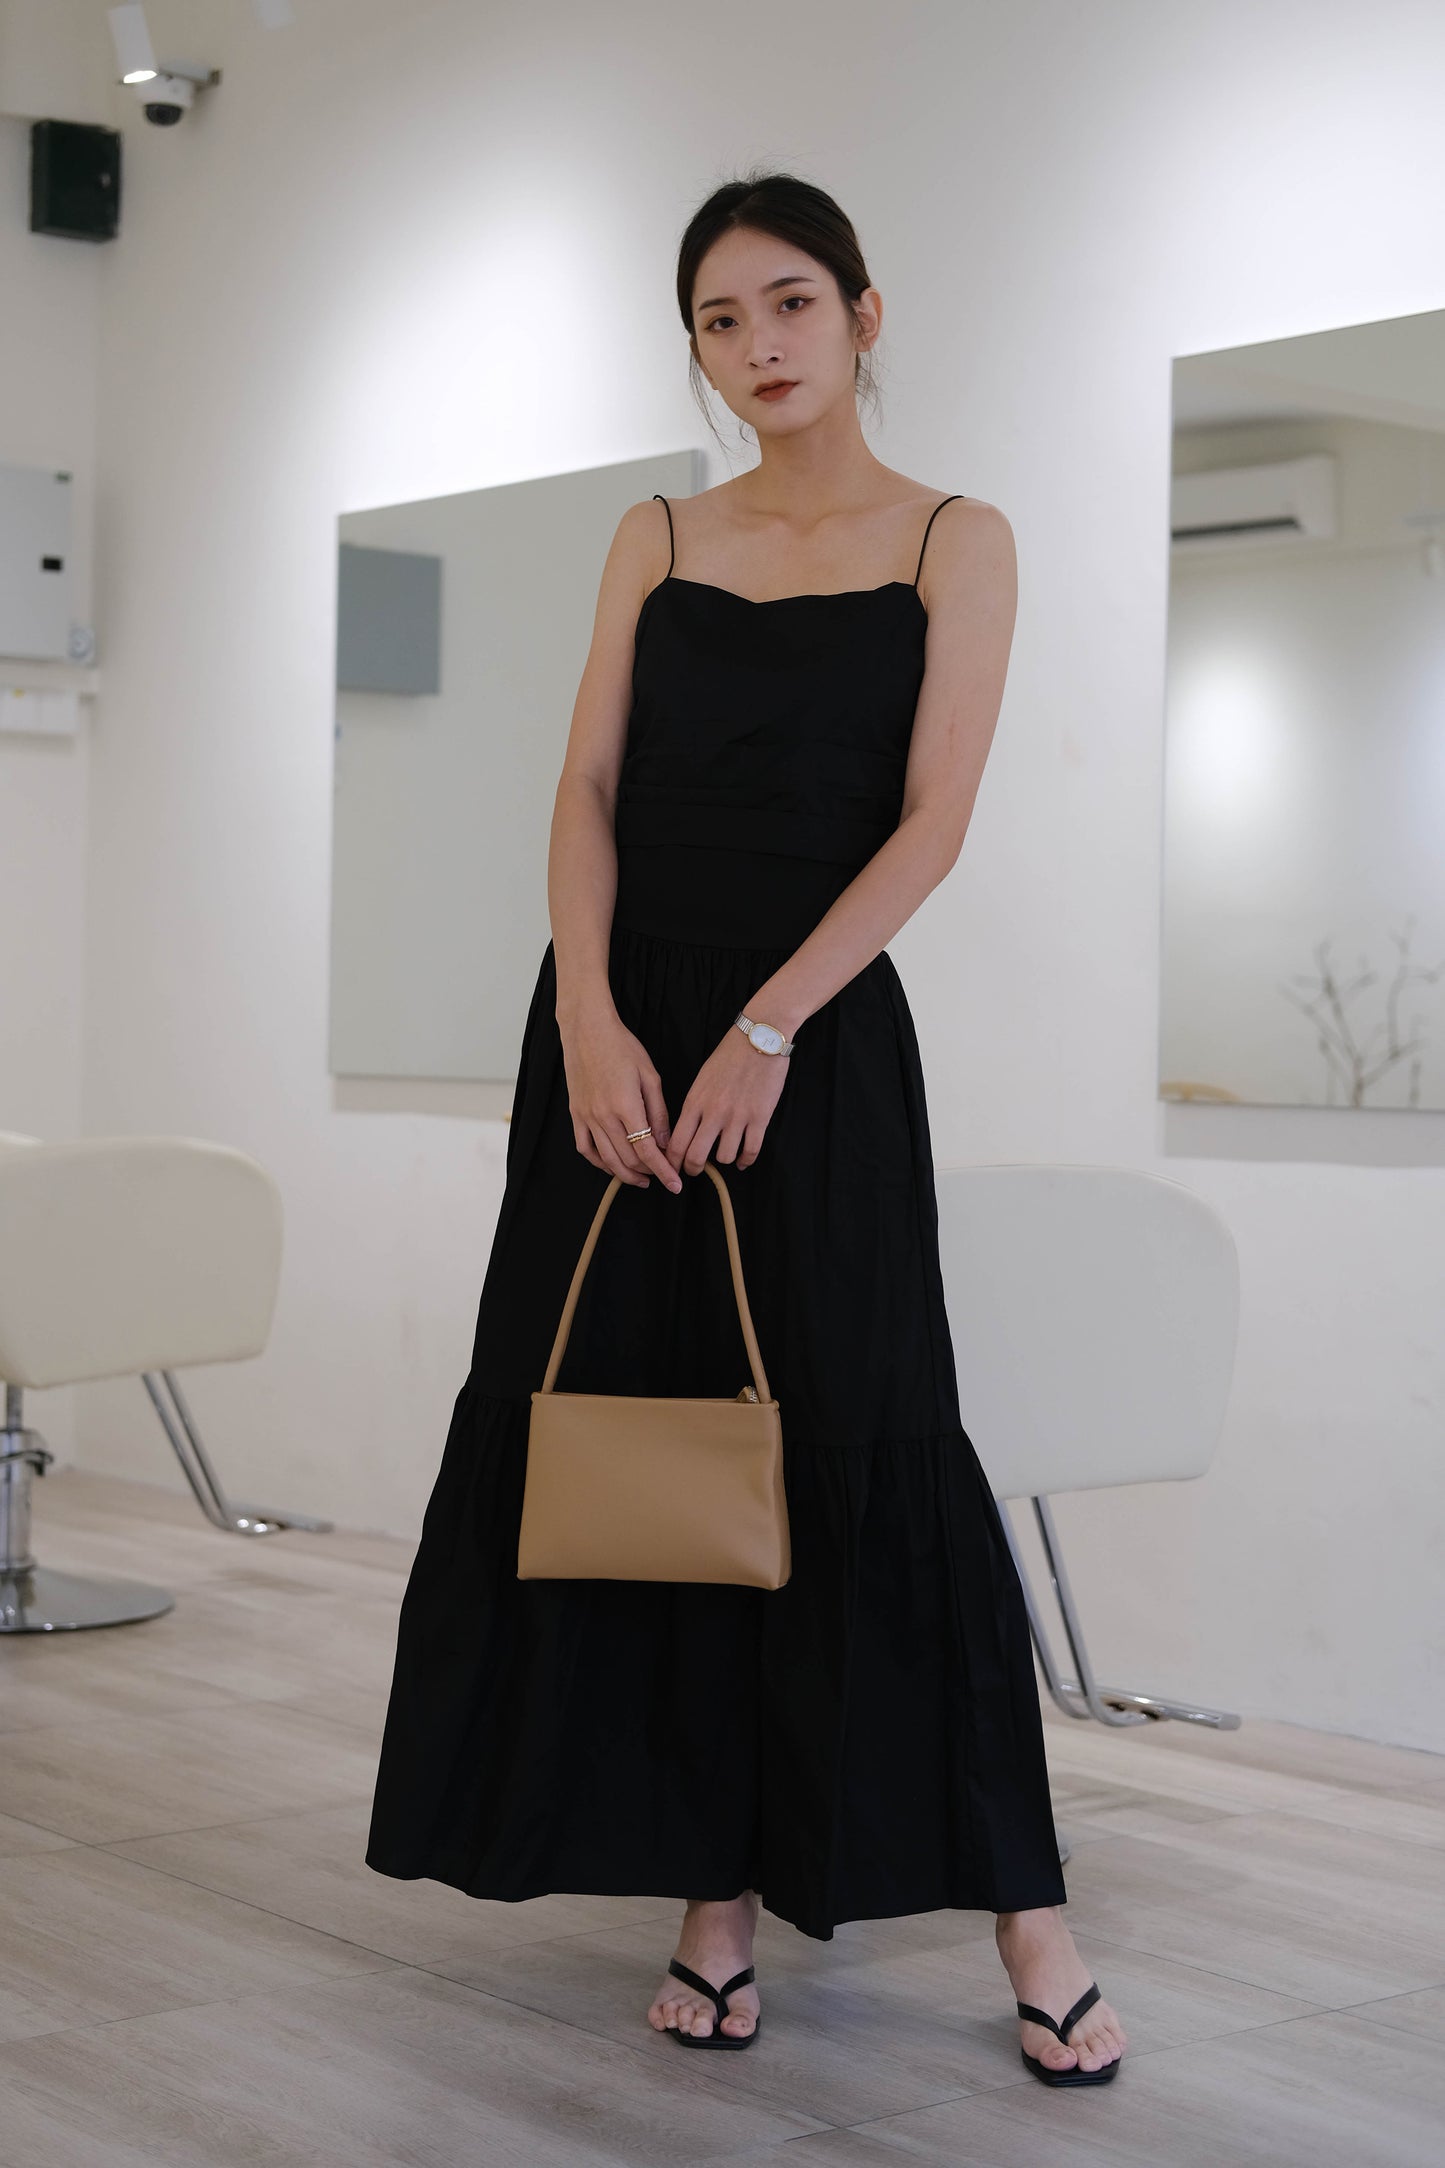 Camisole + high waist A-line skirt in classic black